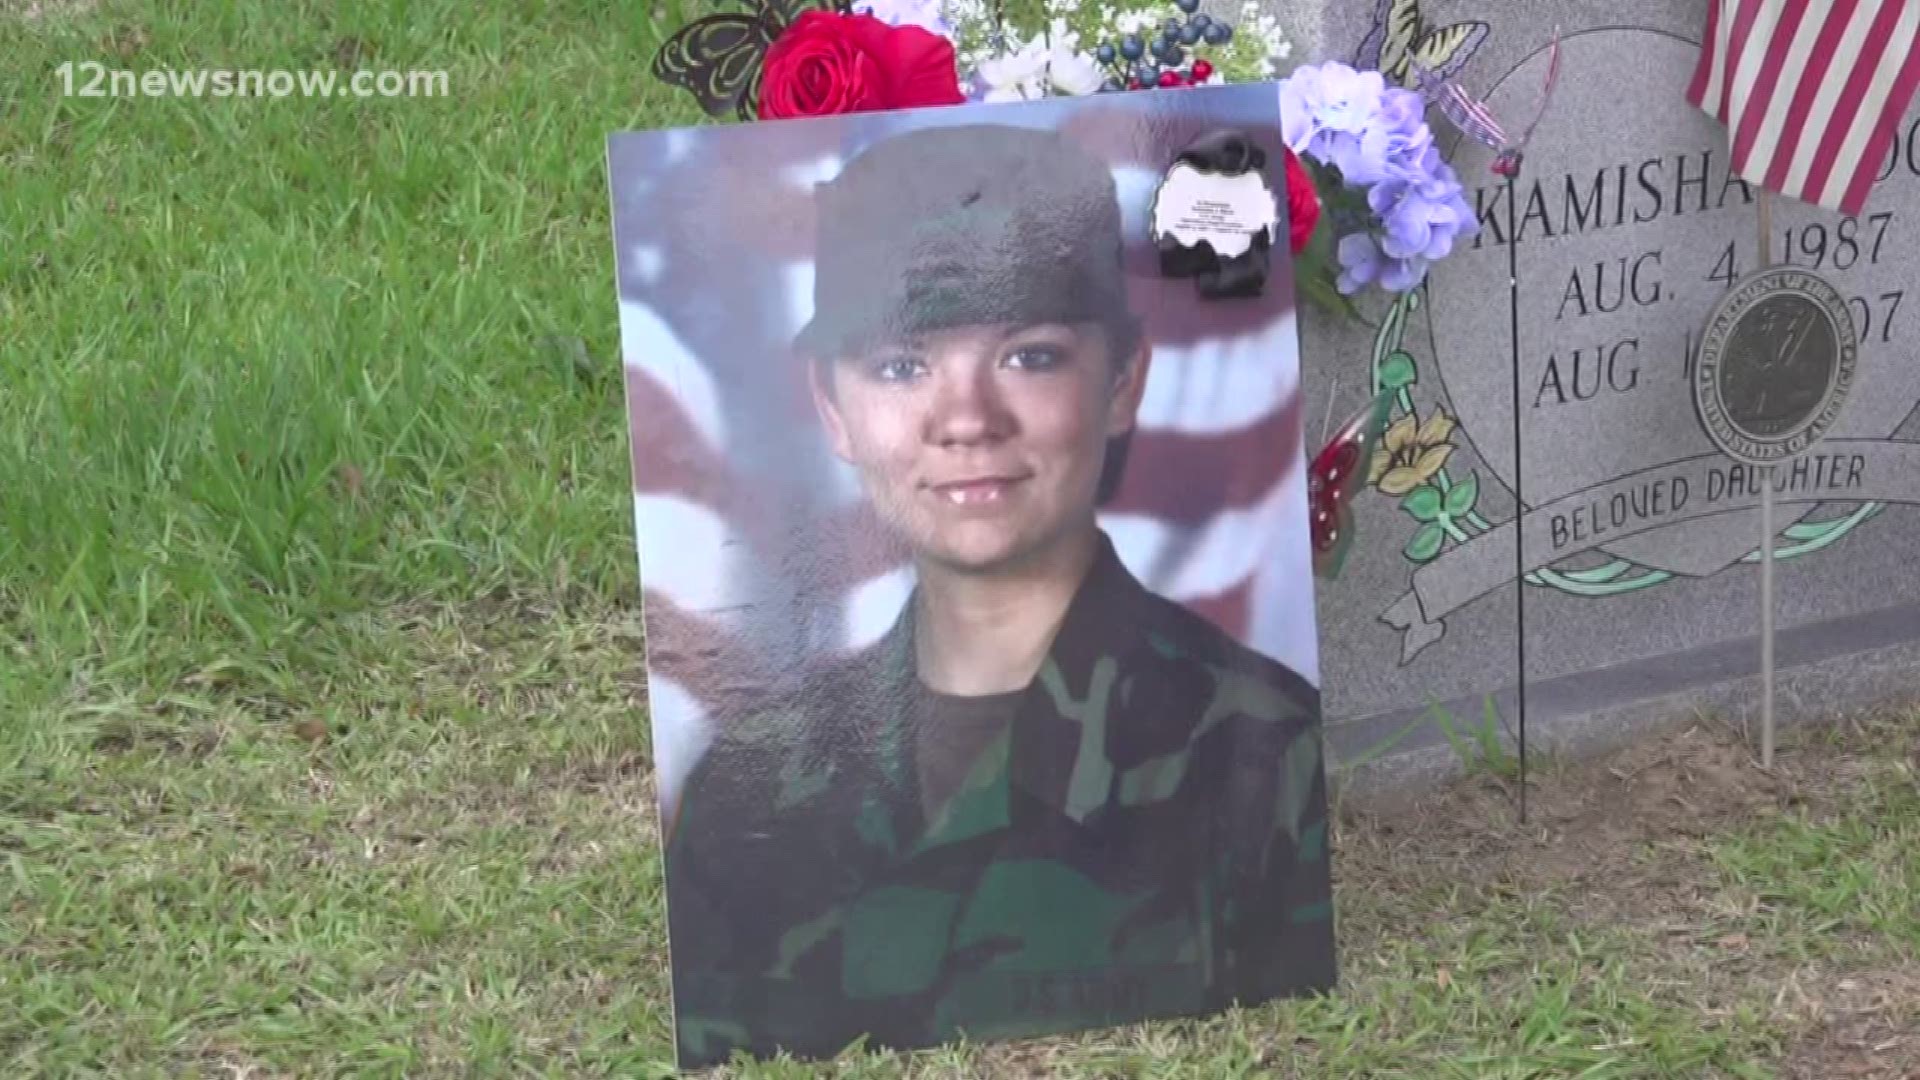 In 2007, Kamisha Black died while serving. Her family believes officials tried to cover up her death